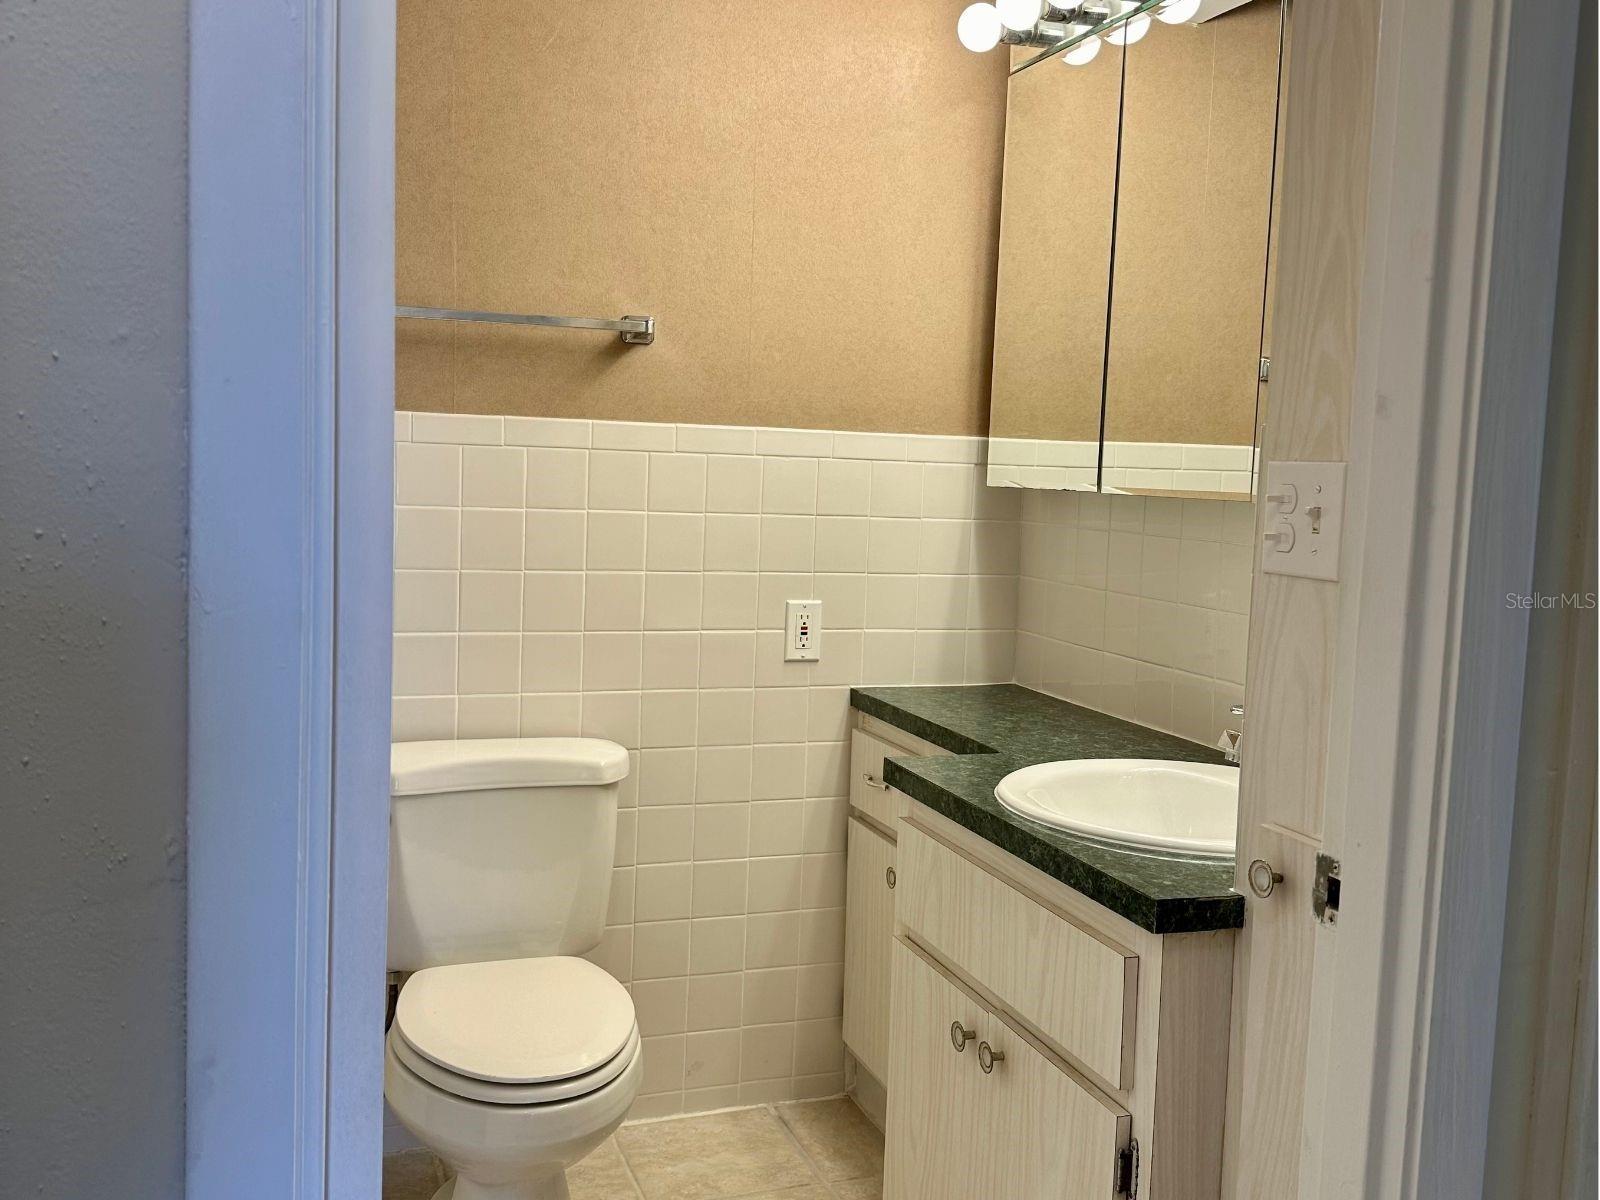 Enjoy spacious comfort! Bathroom 1 welcomes you with ample space and a convenient linen closet just down the hall.